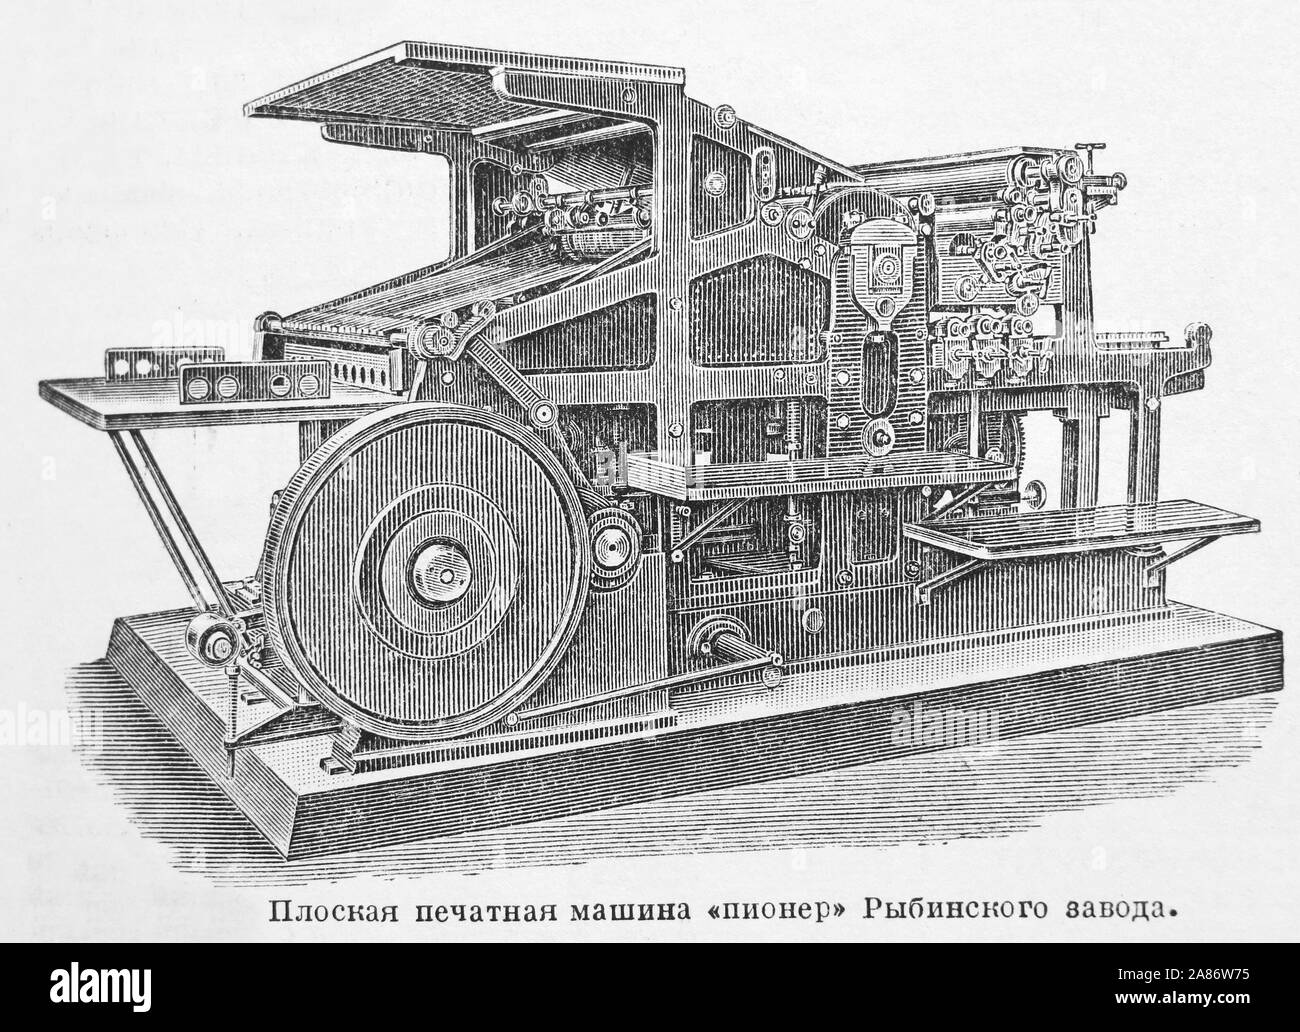 Flat printing machine - pioneer of the Rybinsk plant, Russian Empire. Engraving of the 19th century. Stock Photo